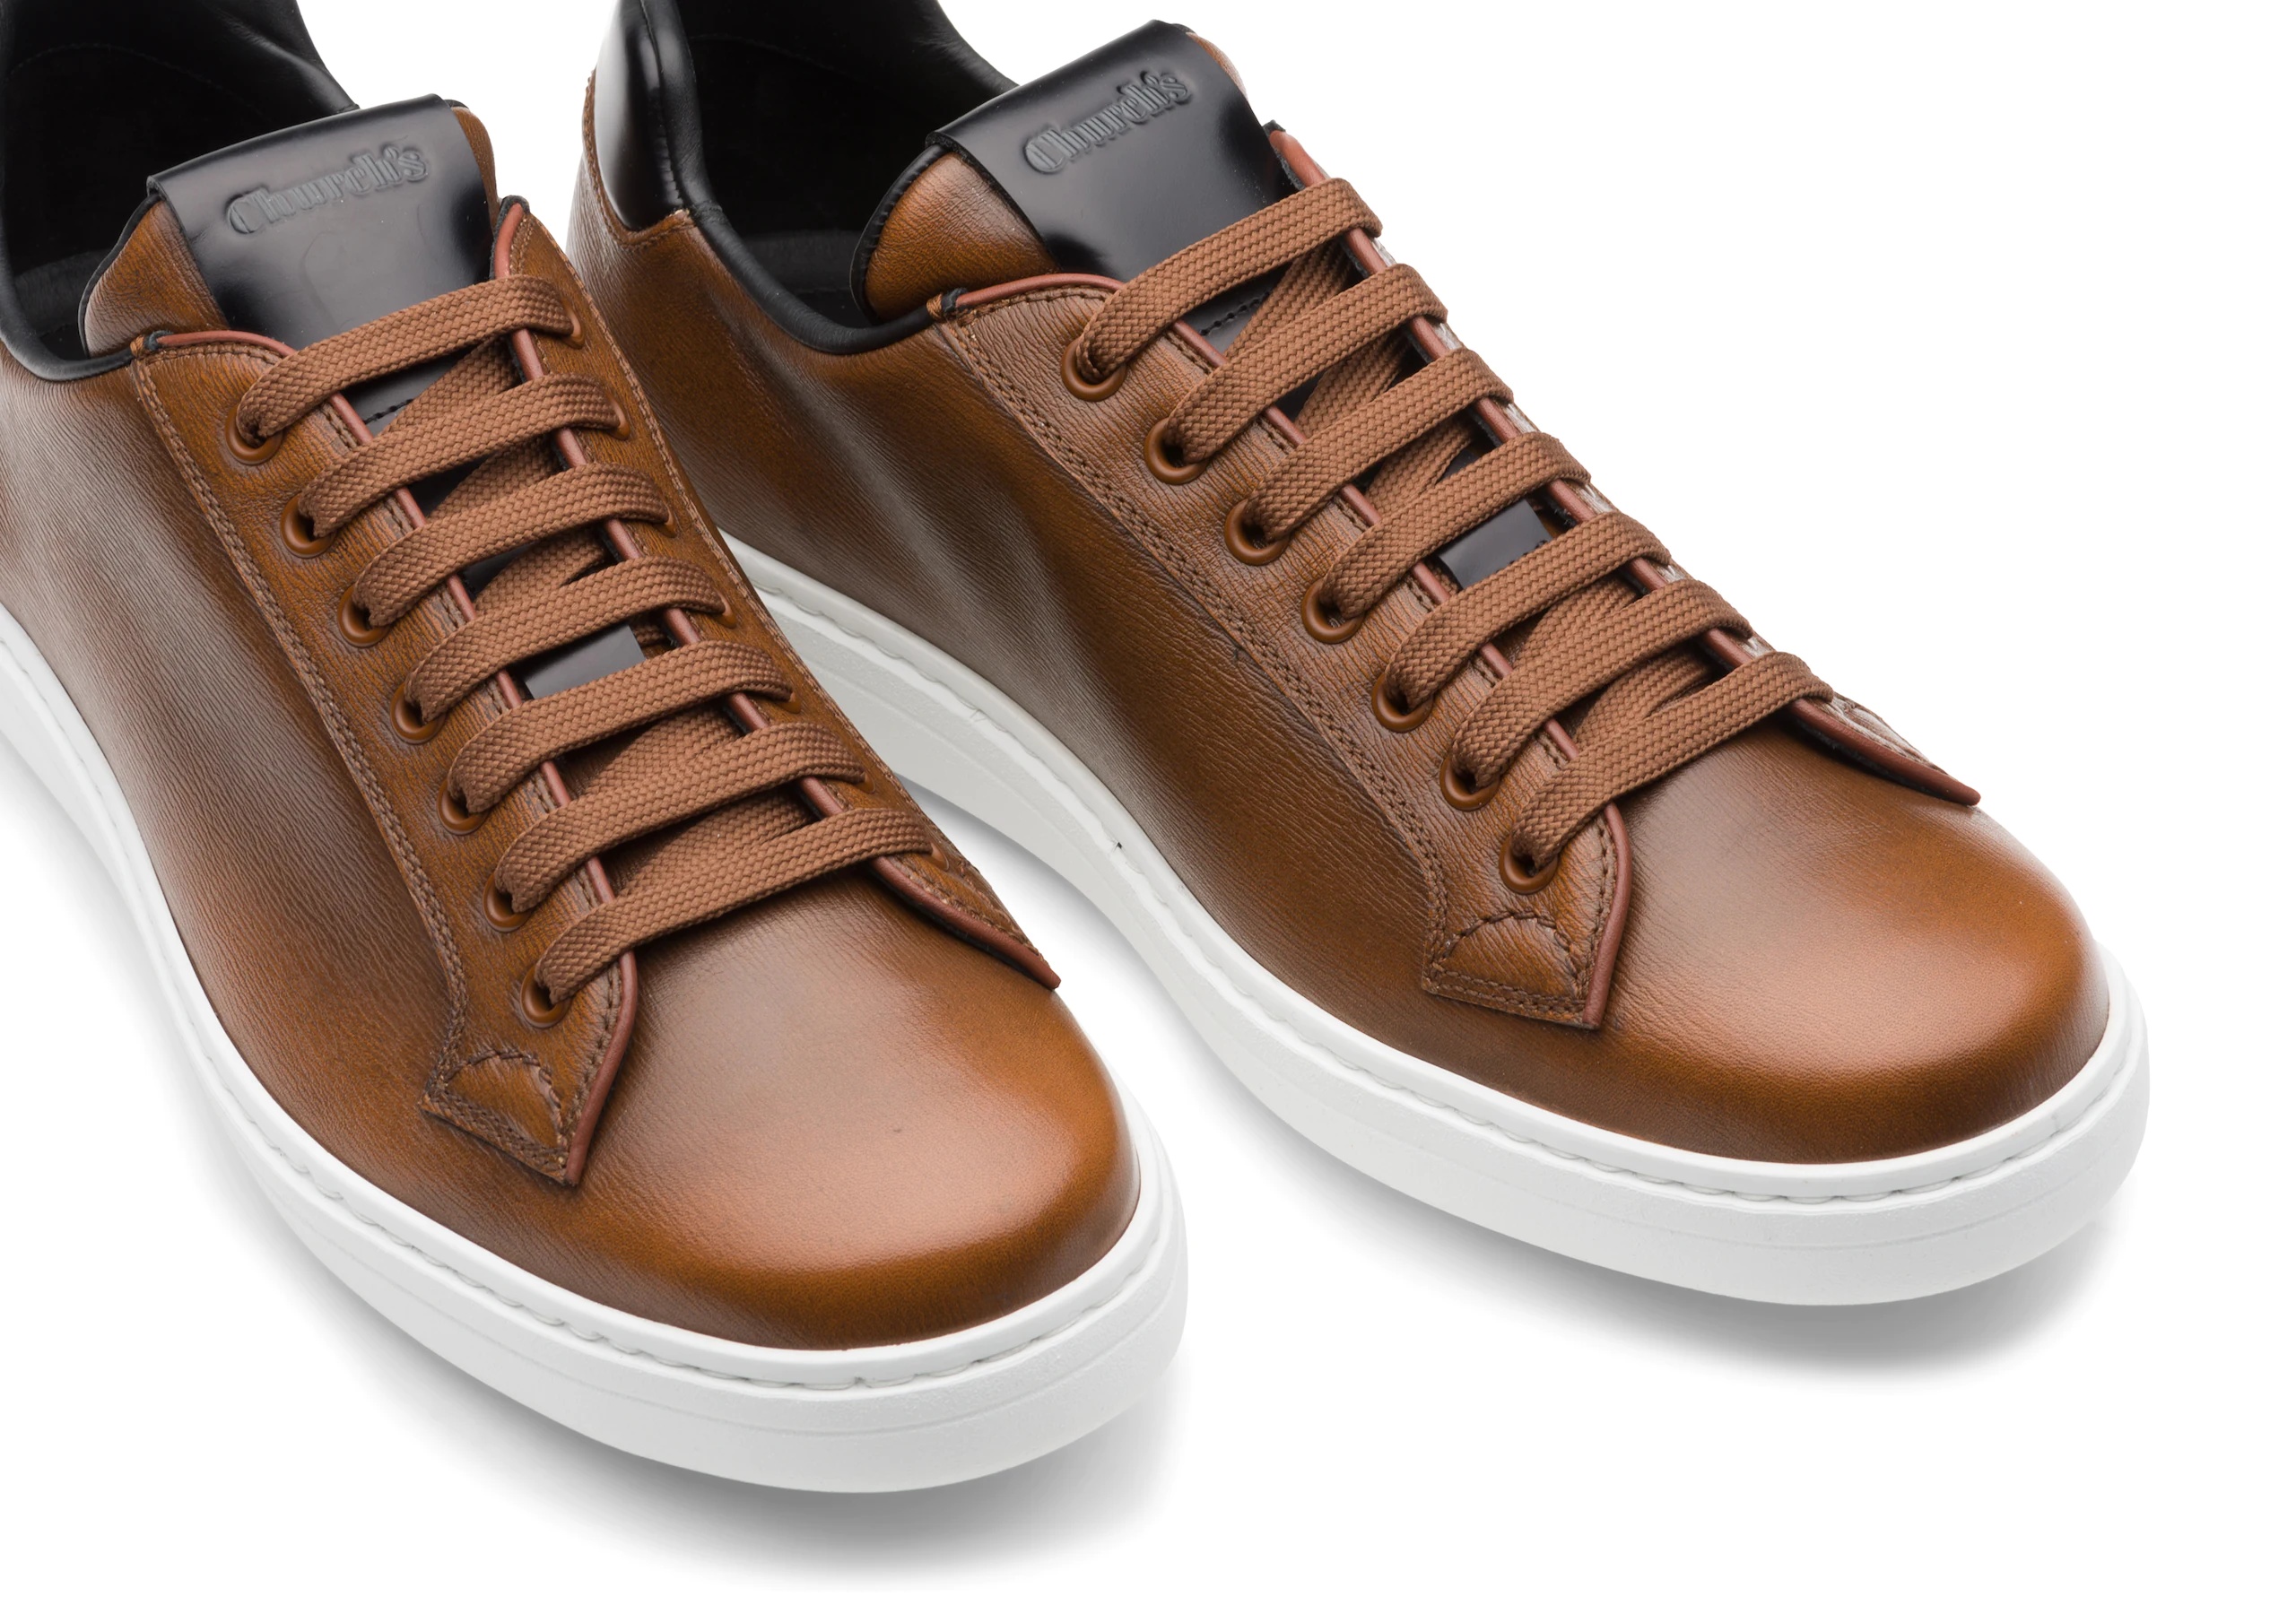 Boland plus 2
St James Leather Classic Sneaker Walnut - 4